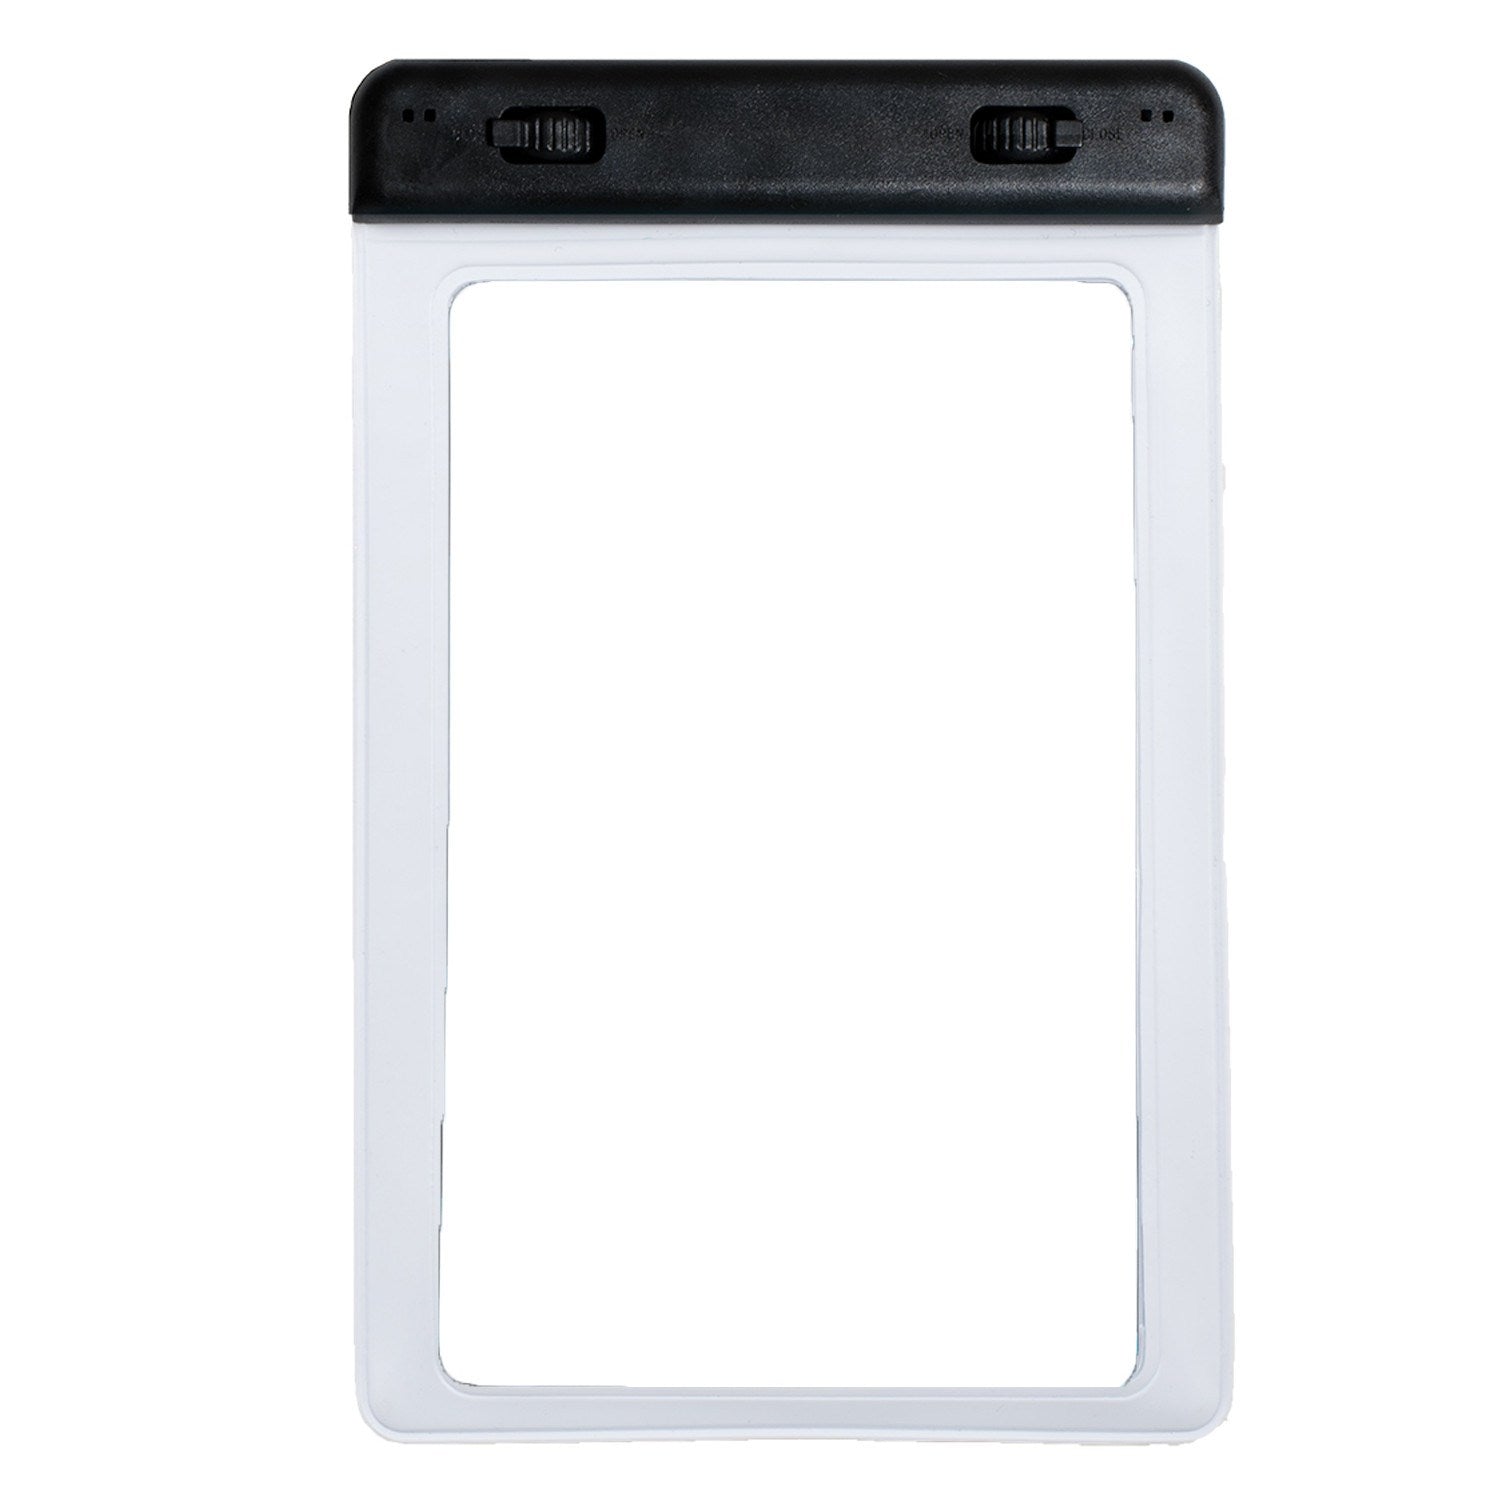 SwimCell Small whiteTablet waterproof case back with windows